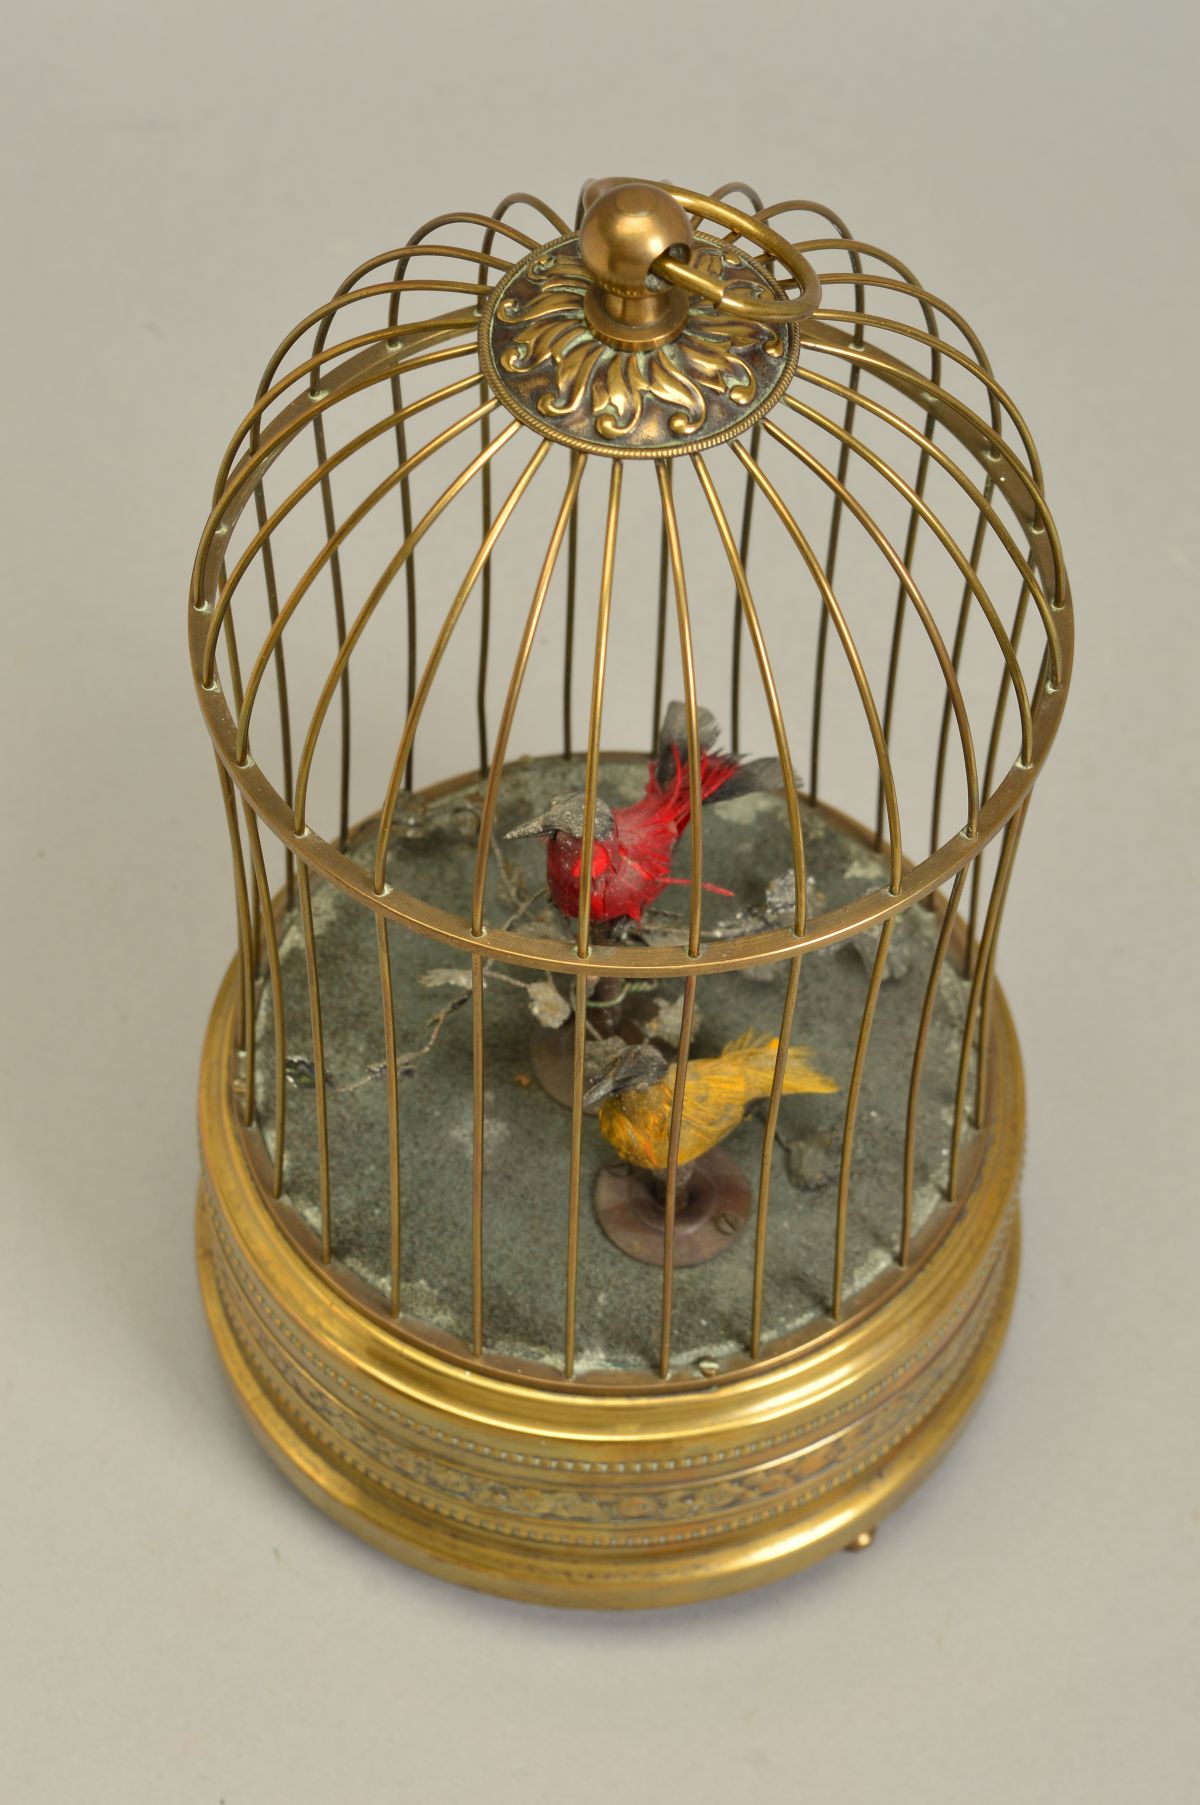 AN EARLY 20TH CENTURY CLOCKWORK AUTOMATON OF TWO BIRDS IN A BRASS CAGE, both birds sing and move - Image 4 of 6